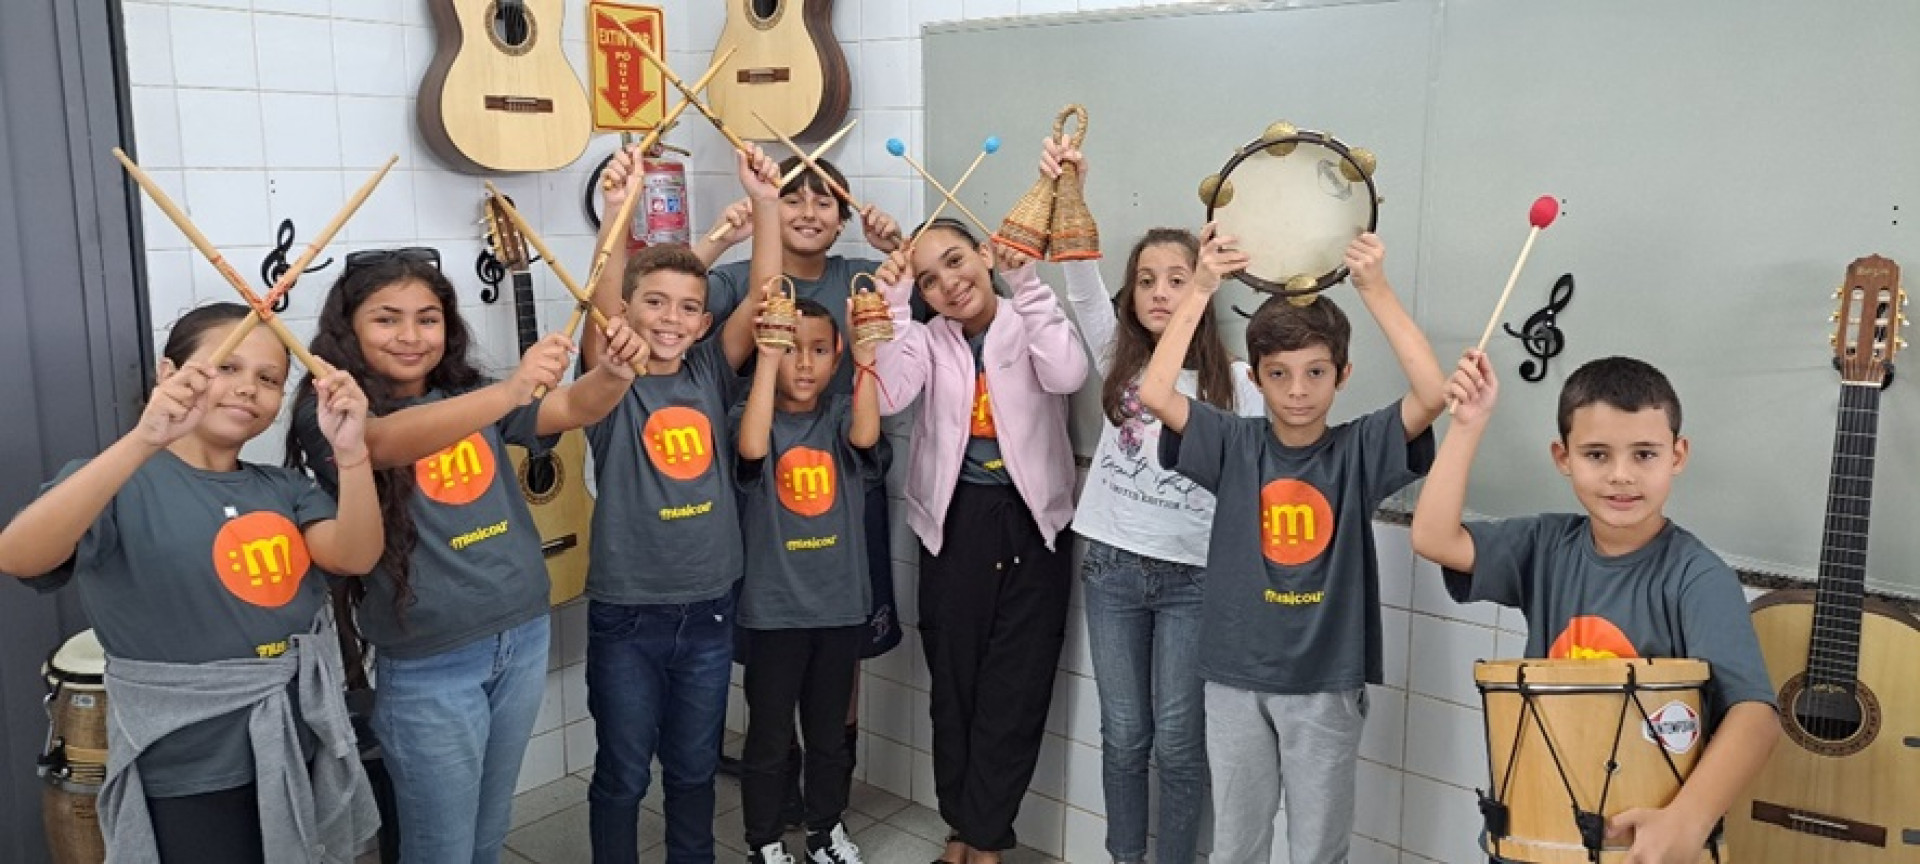 Project aims to offer free music lessons